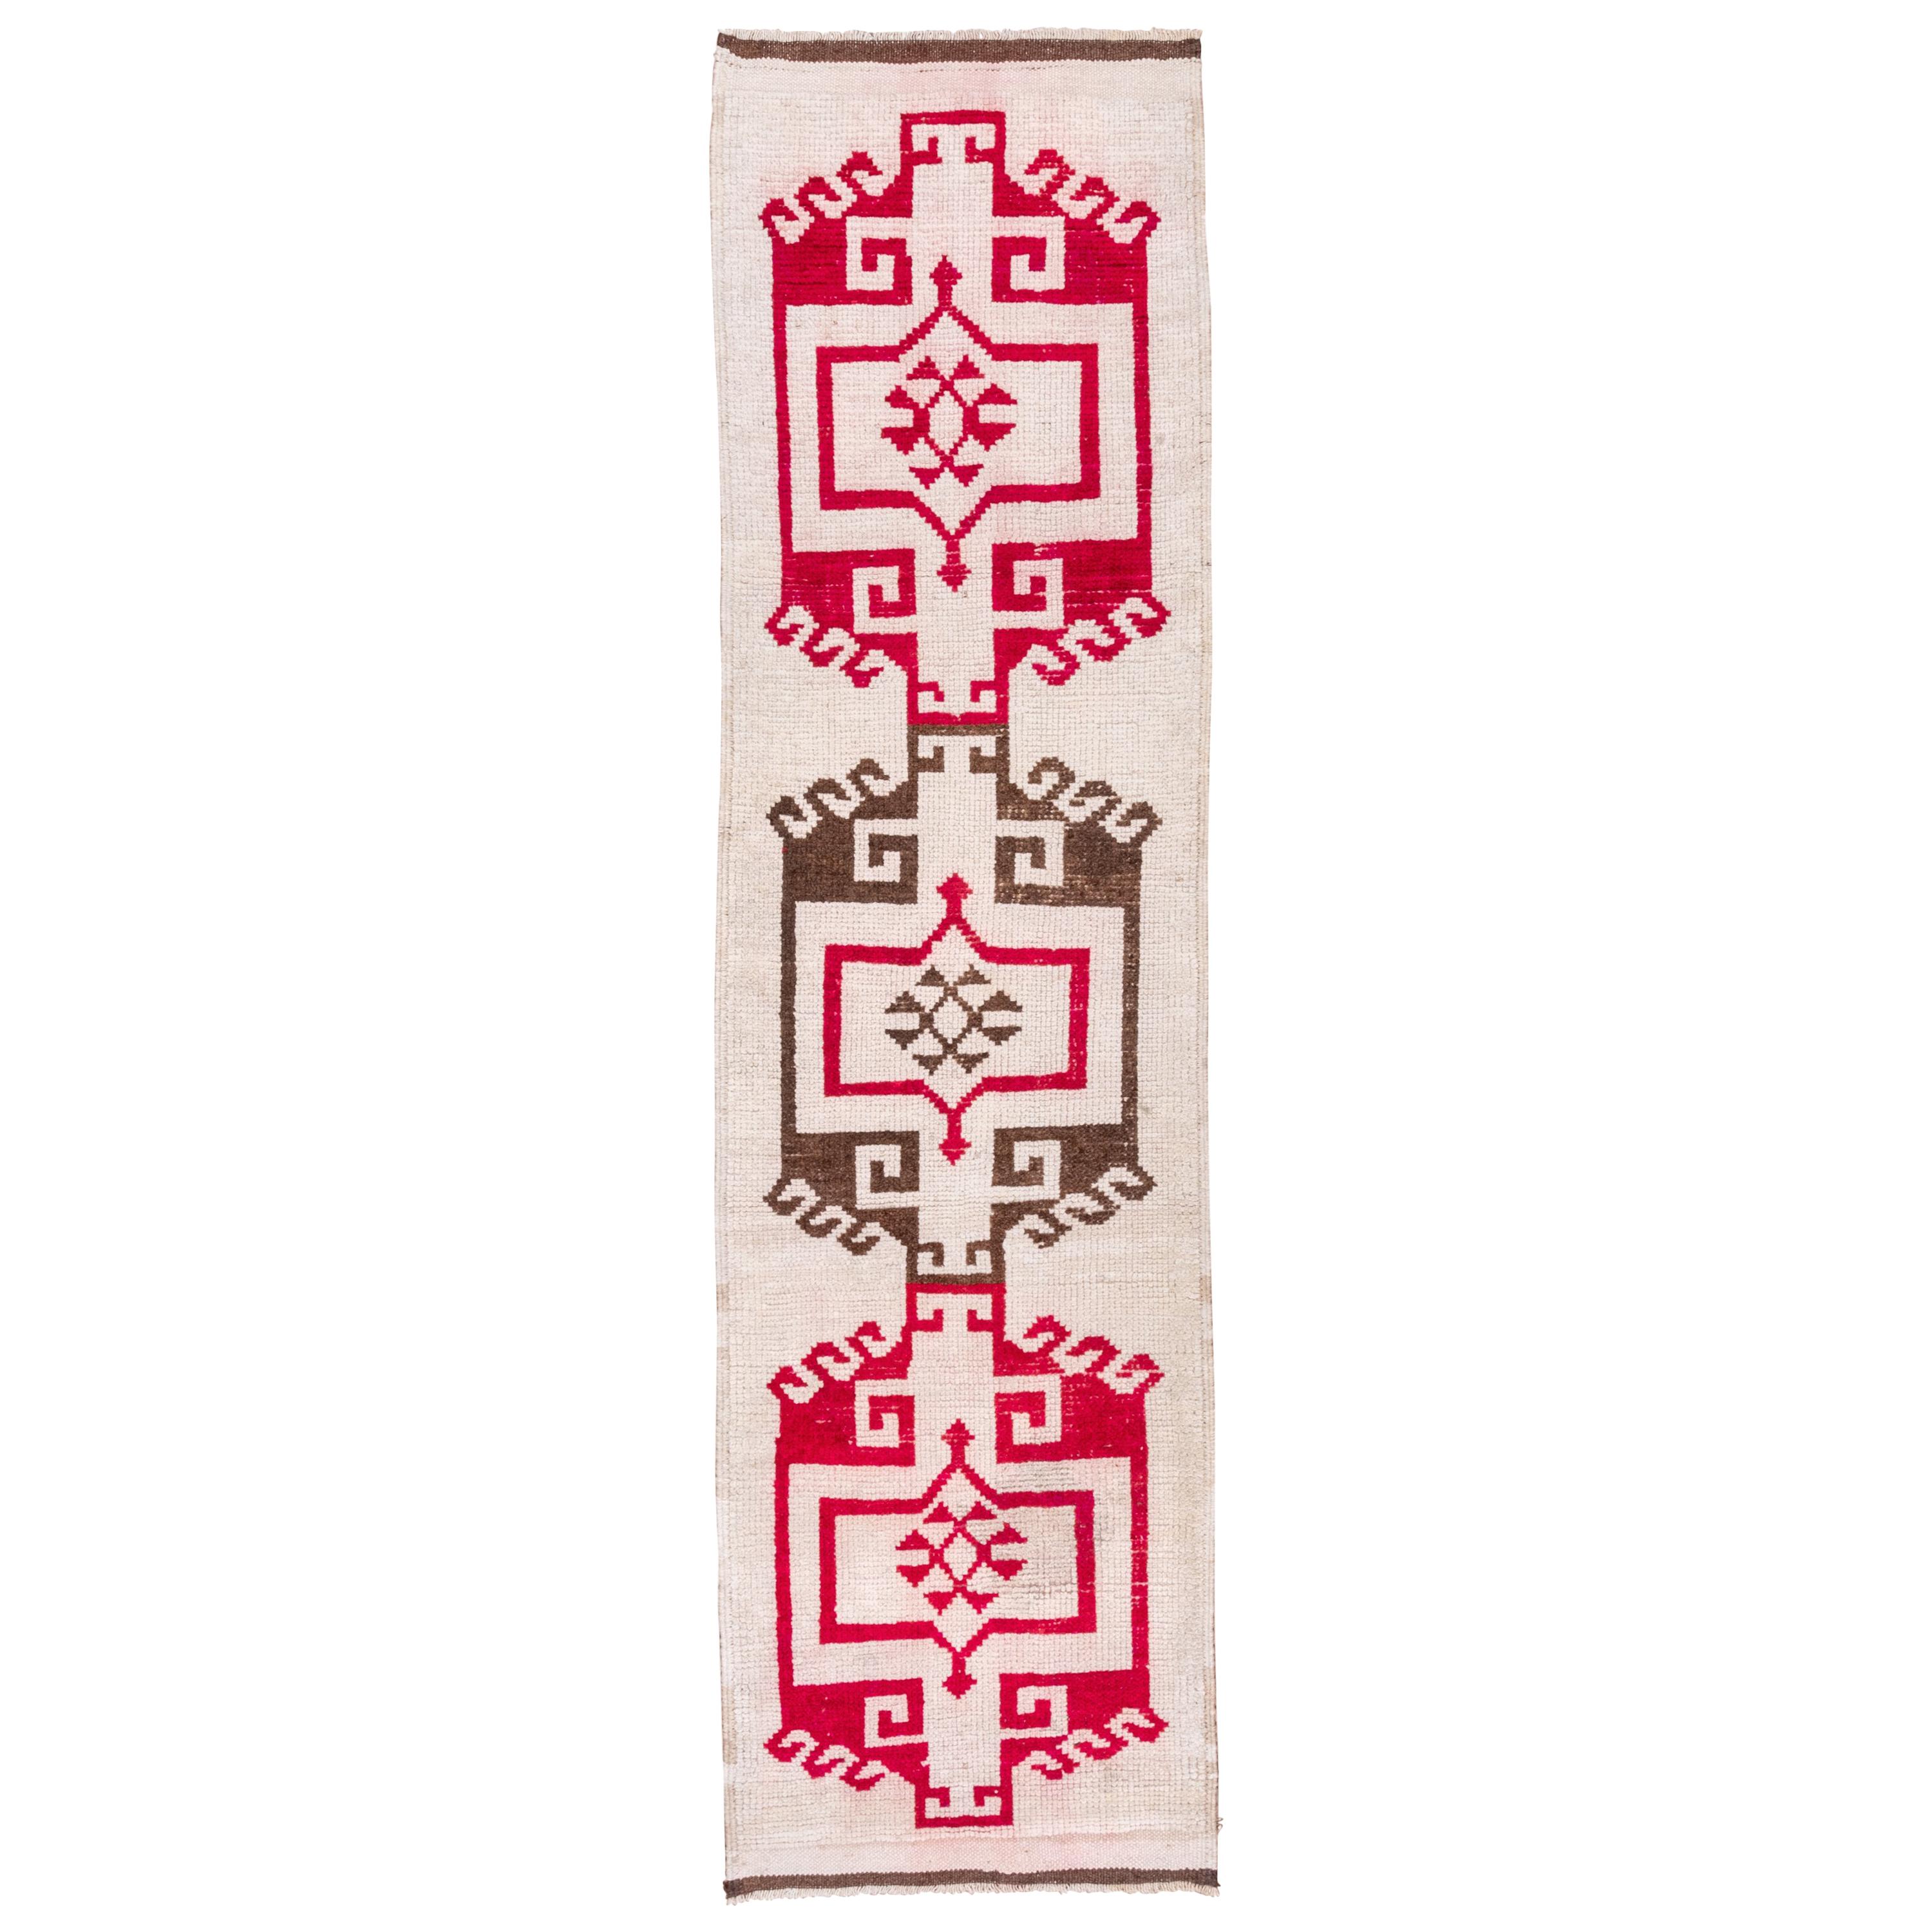 Rustic Antique Turkish Kars Runner, White Background, Brown & Pink Accents